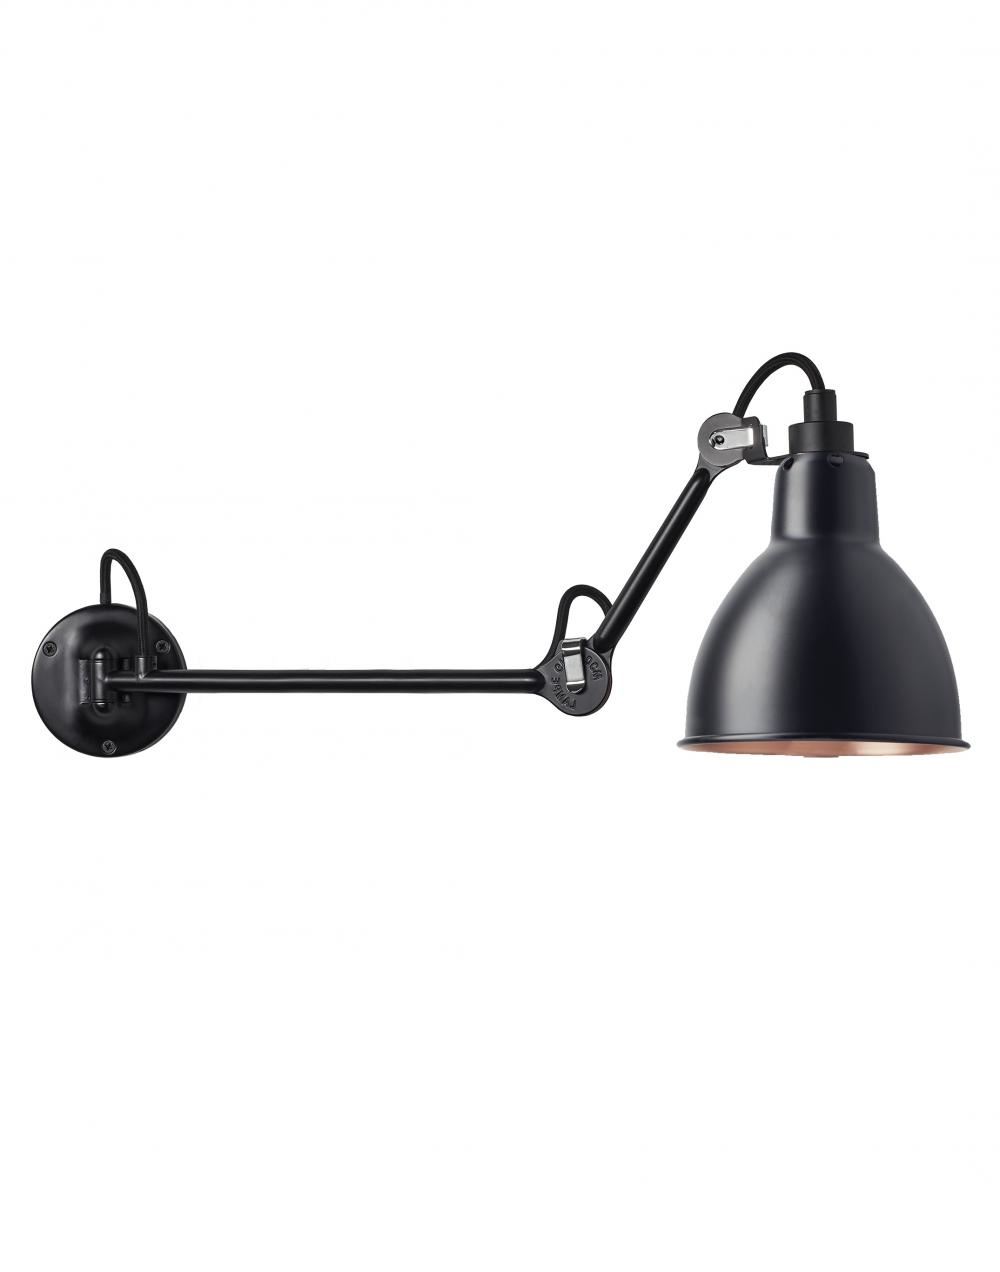 Lampe Gras 204 Wall Light Large Black With Copper Interior